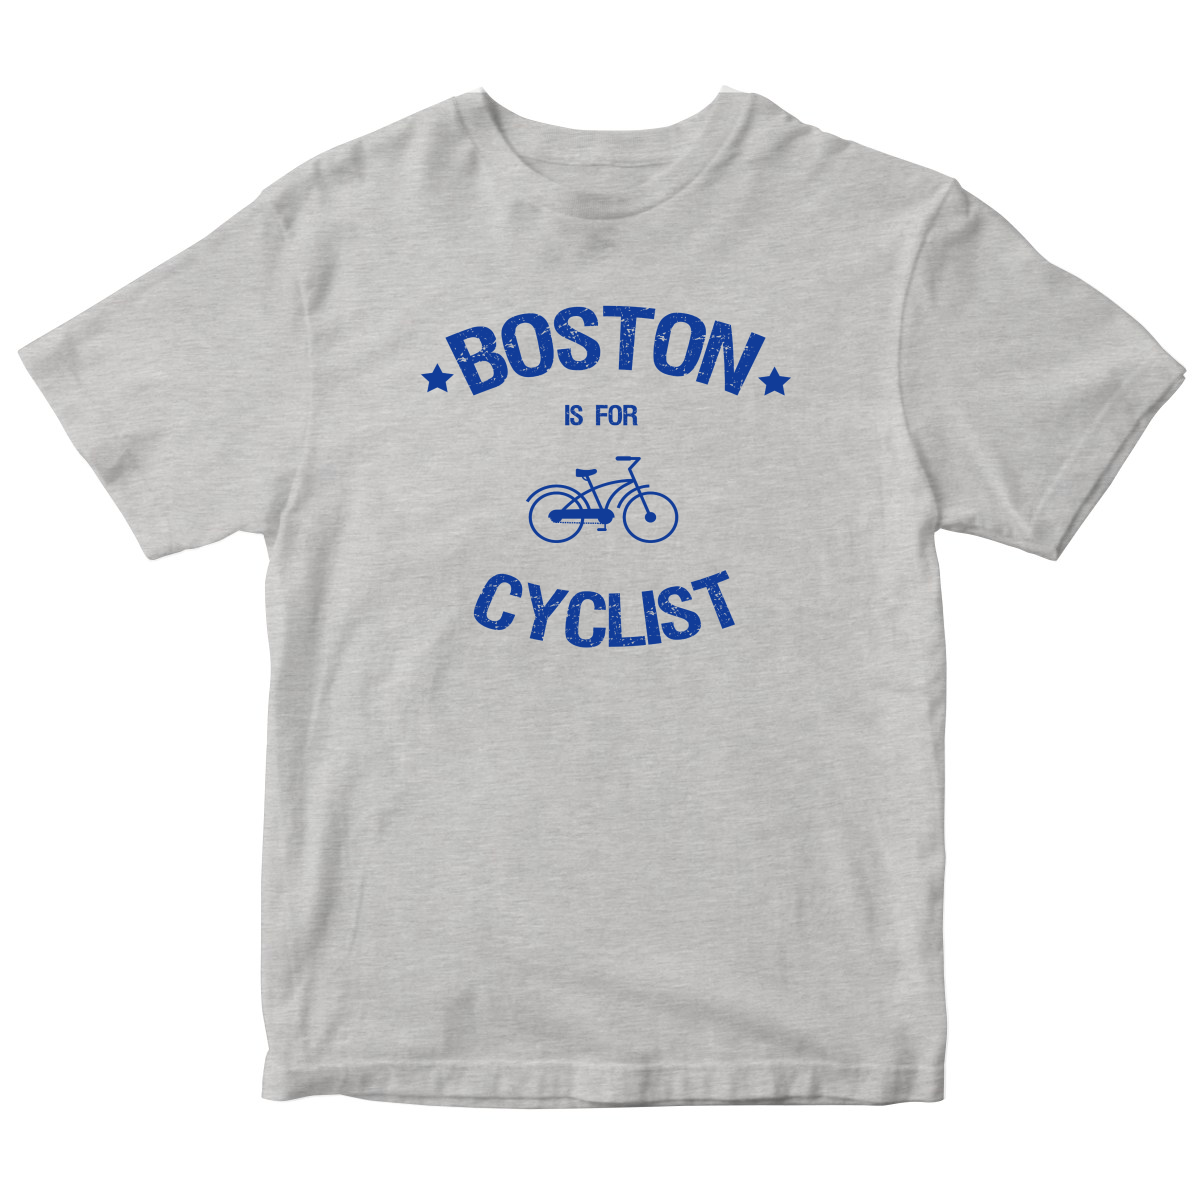 Boston Is For Cyclists Kids T-shirt